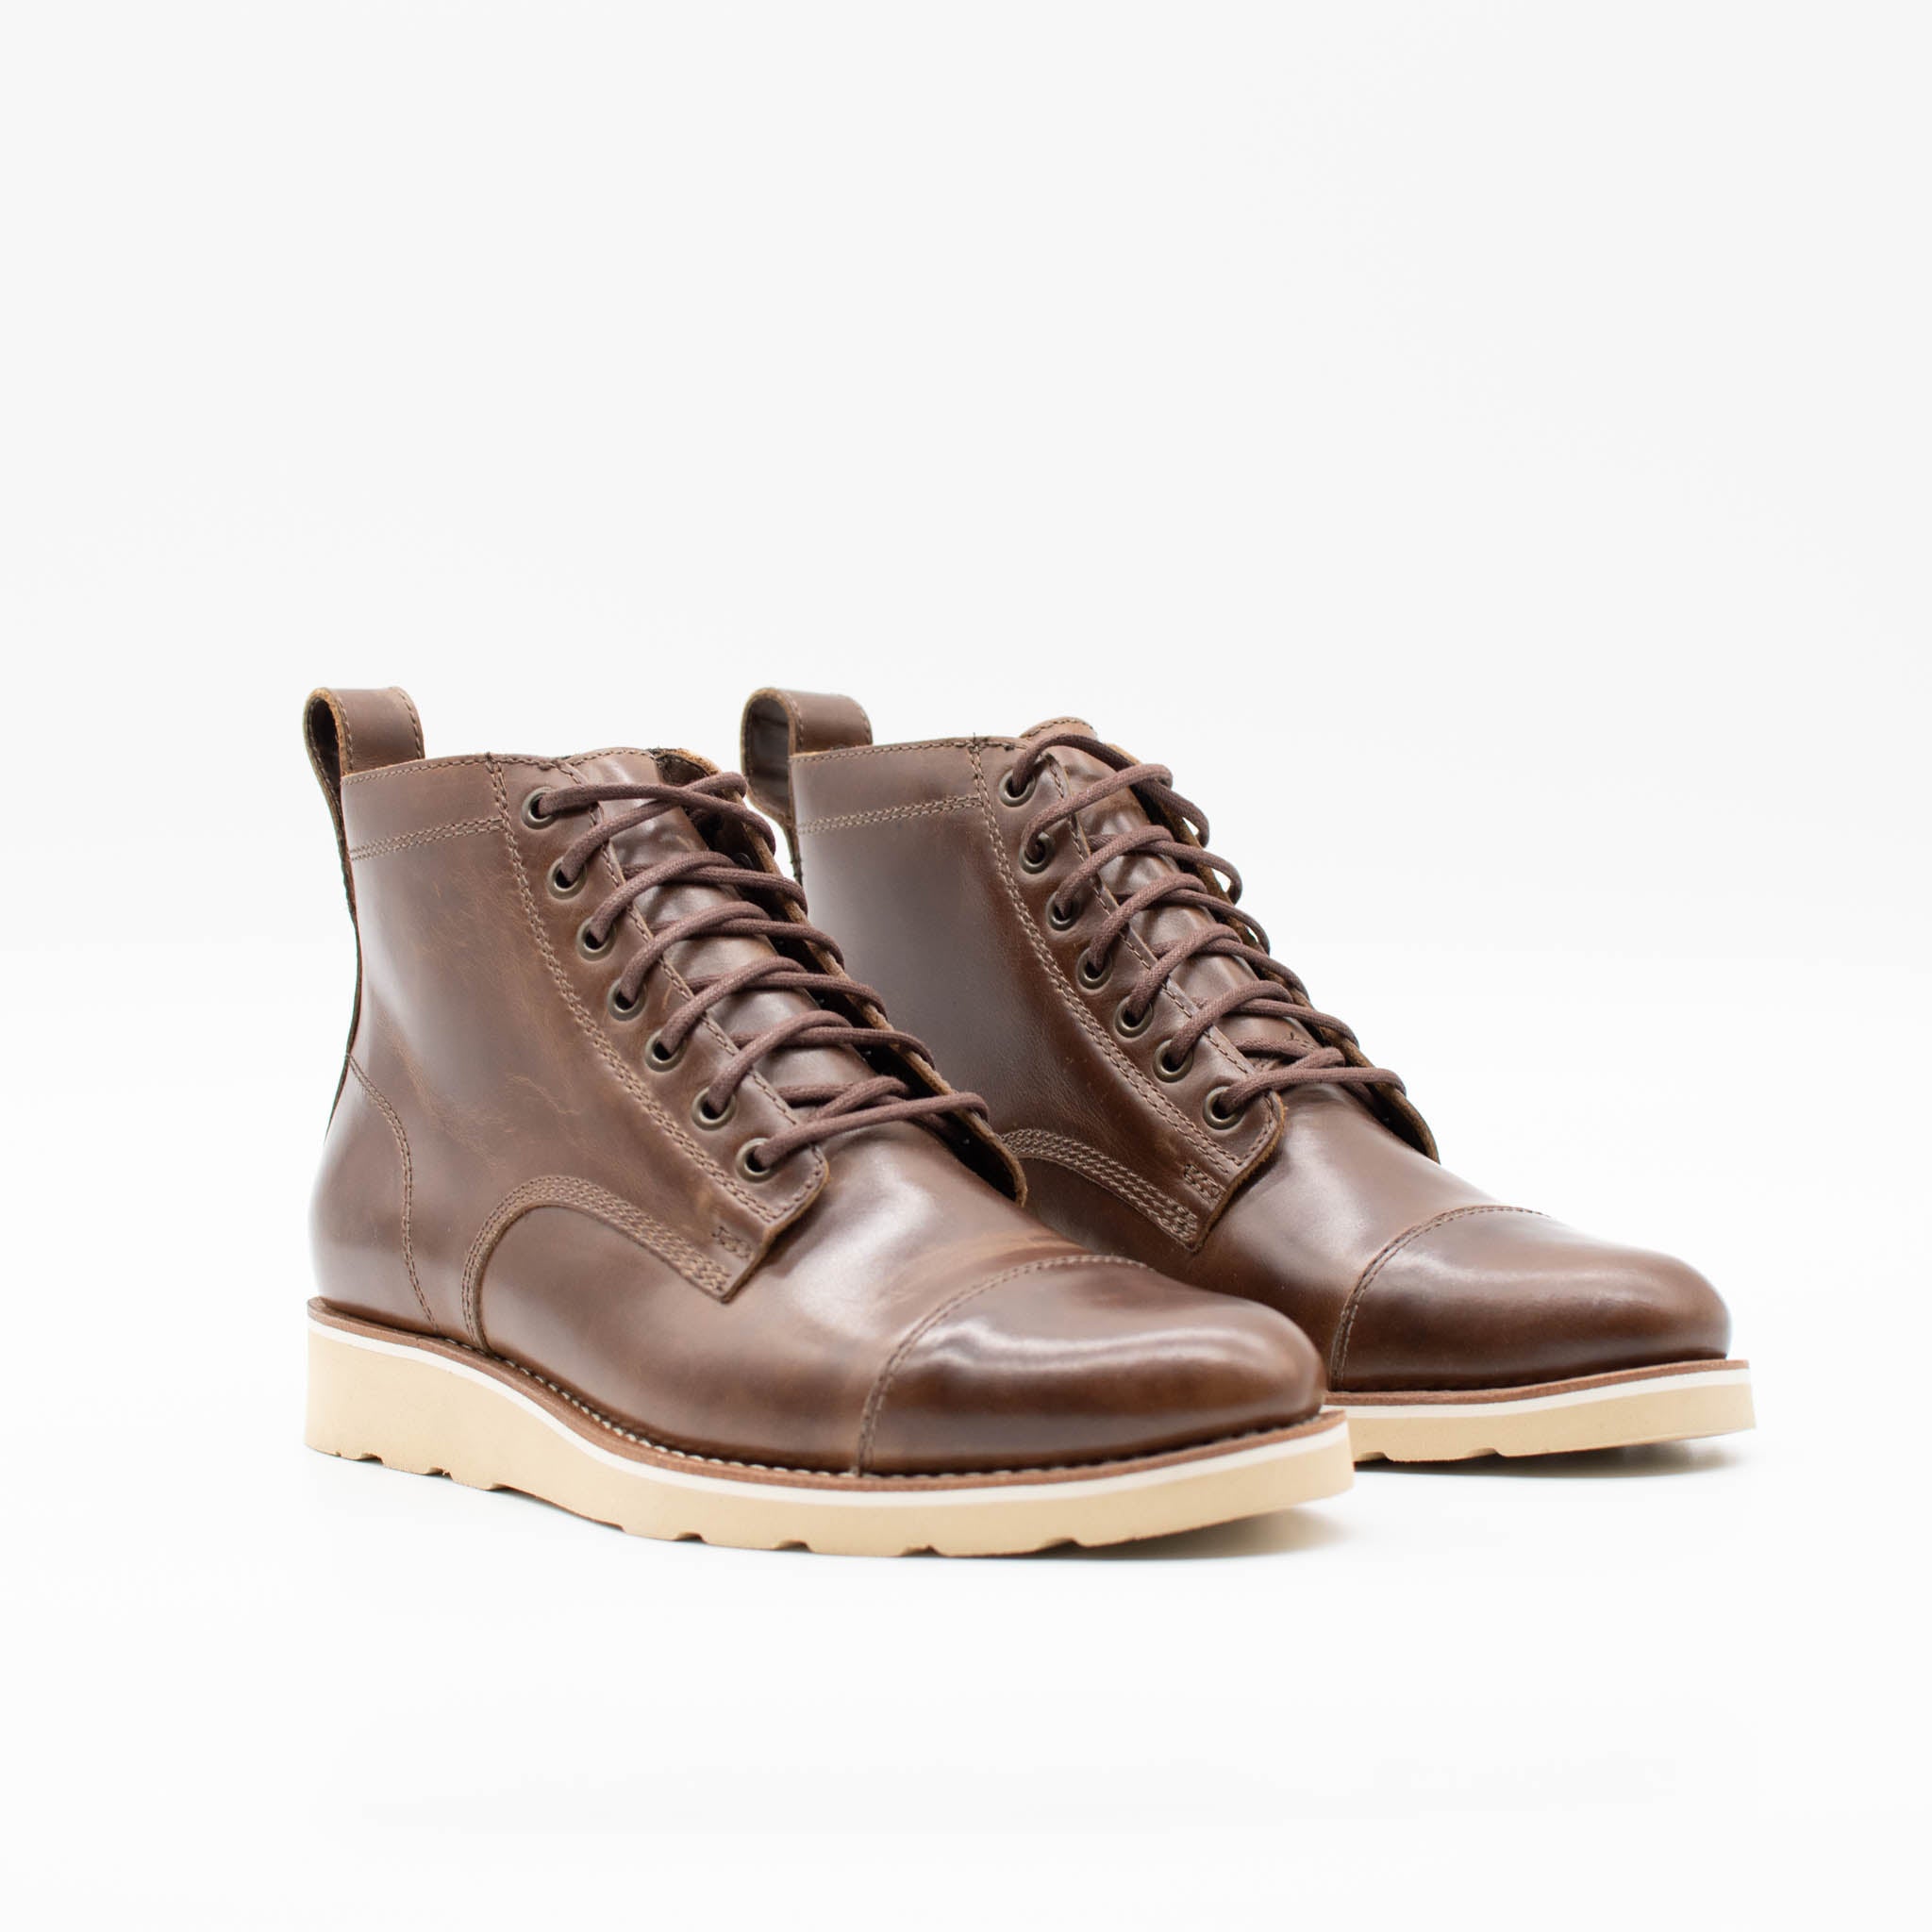 Lou Dark Natural by HELM Boots